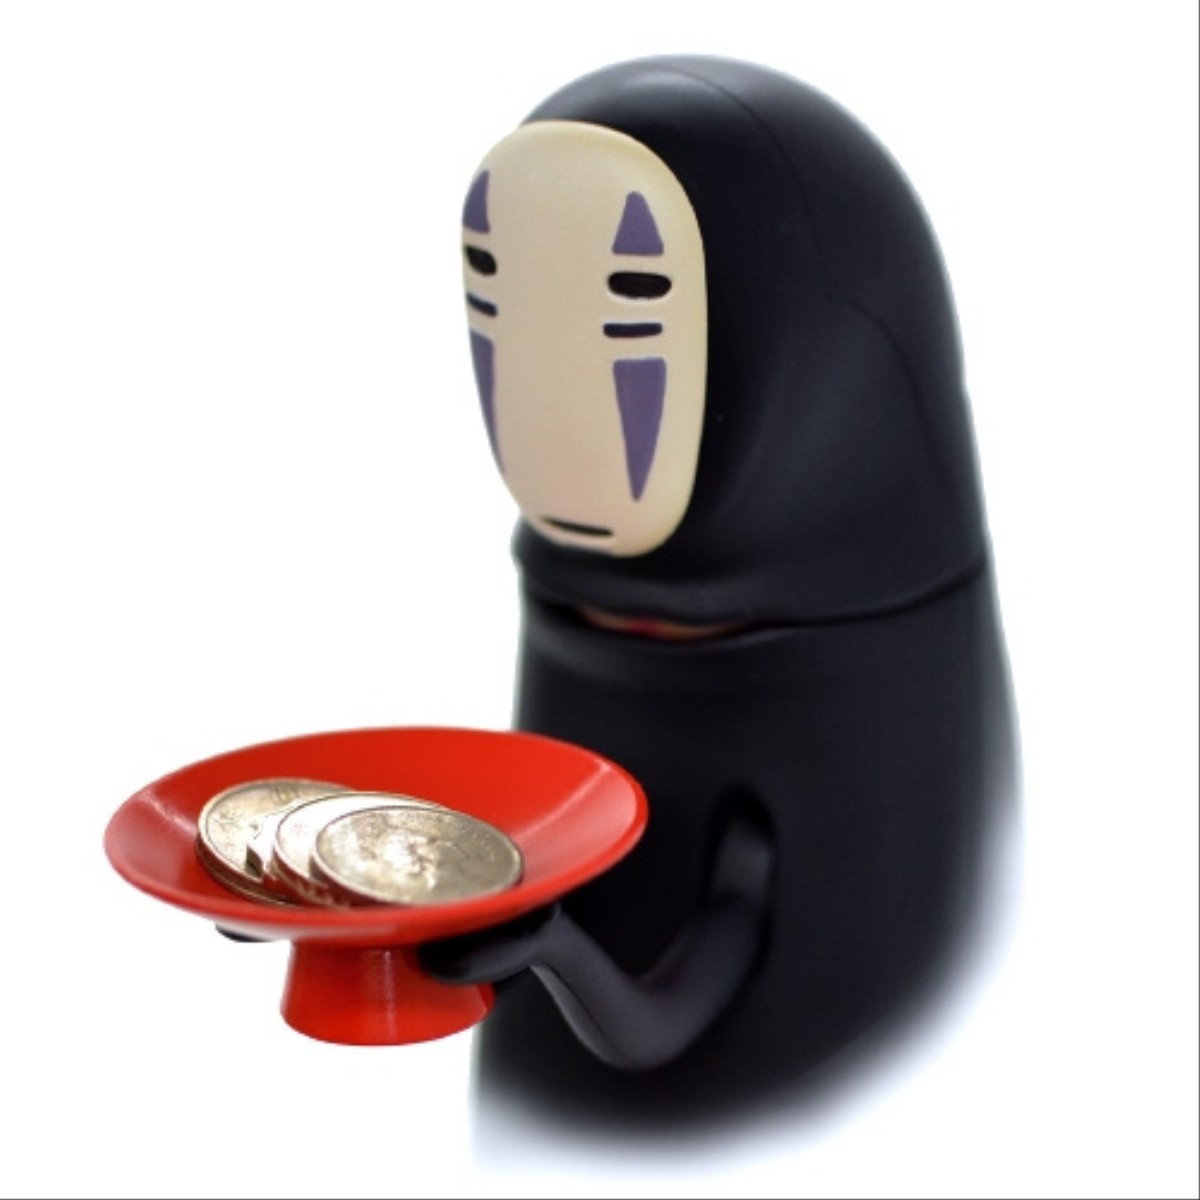 Spirited Away More! No Face Coin Munching Bank Figure - Official